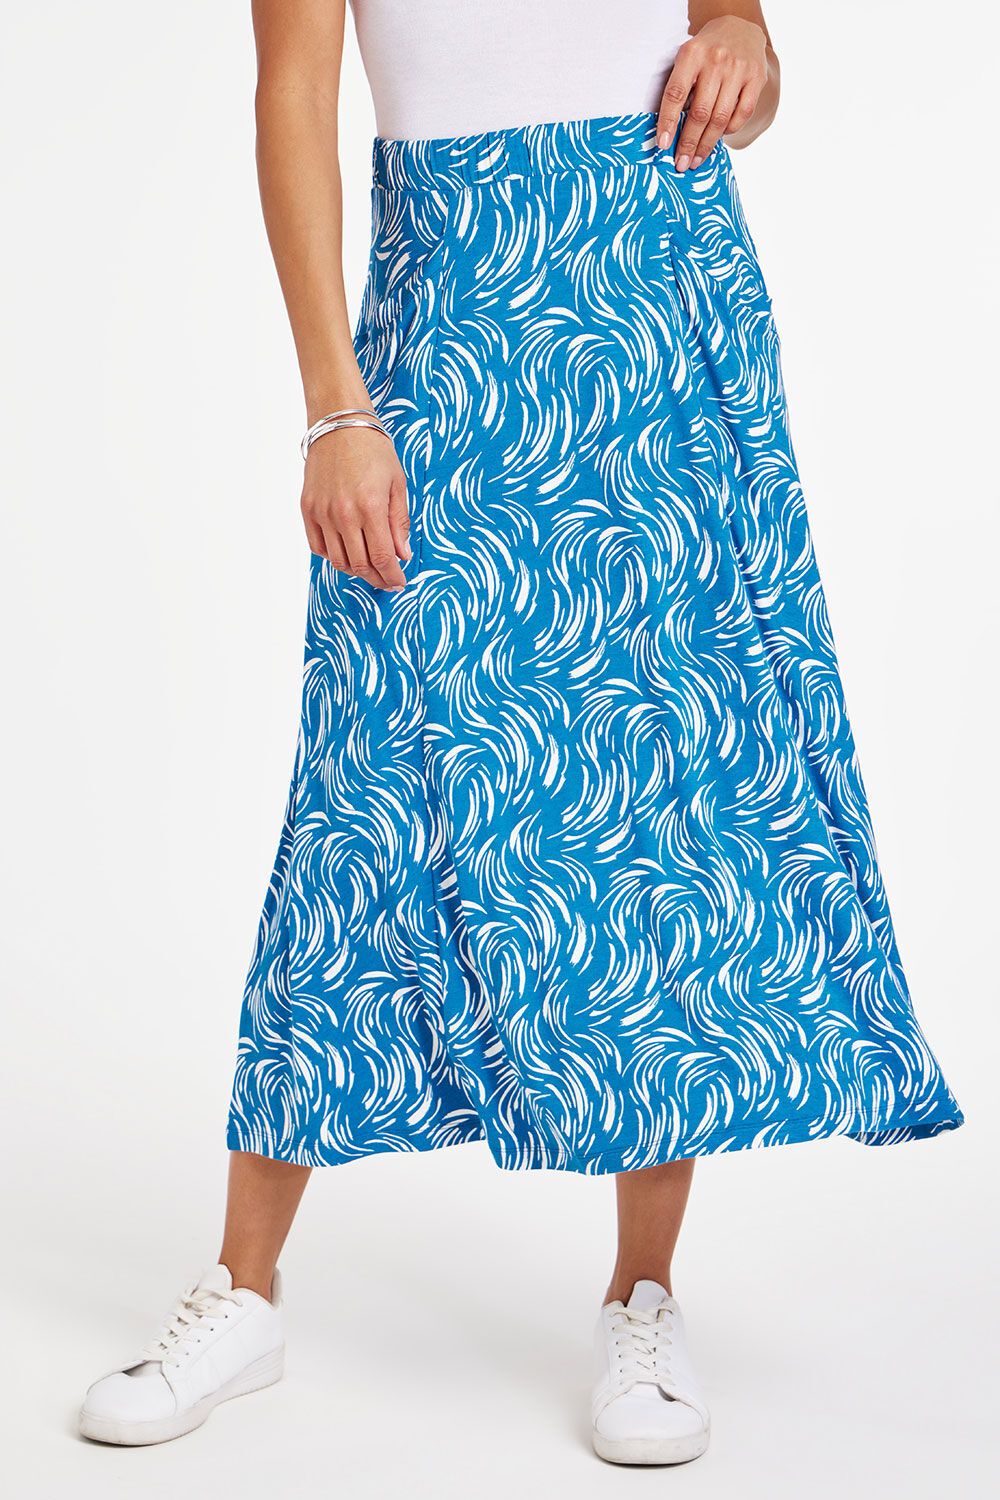 Bonmarche Teal Swirl Print Longline Jersey Elasticated Skirt With Pocket Detail, Size: 18